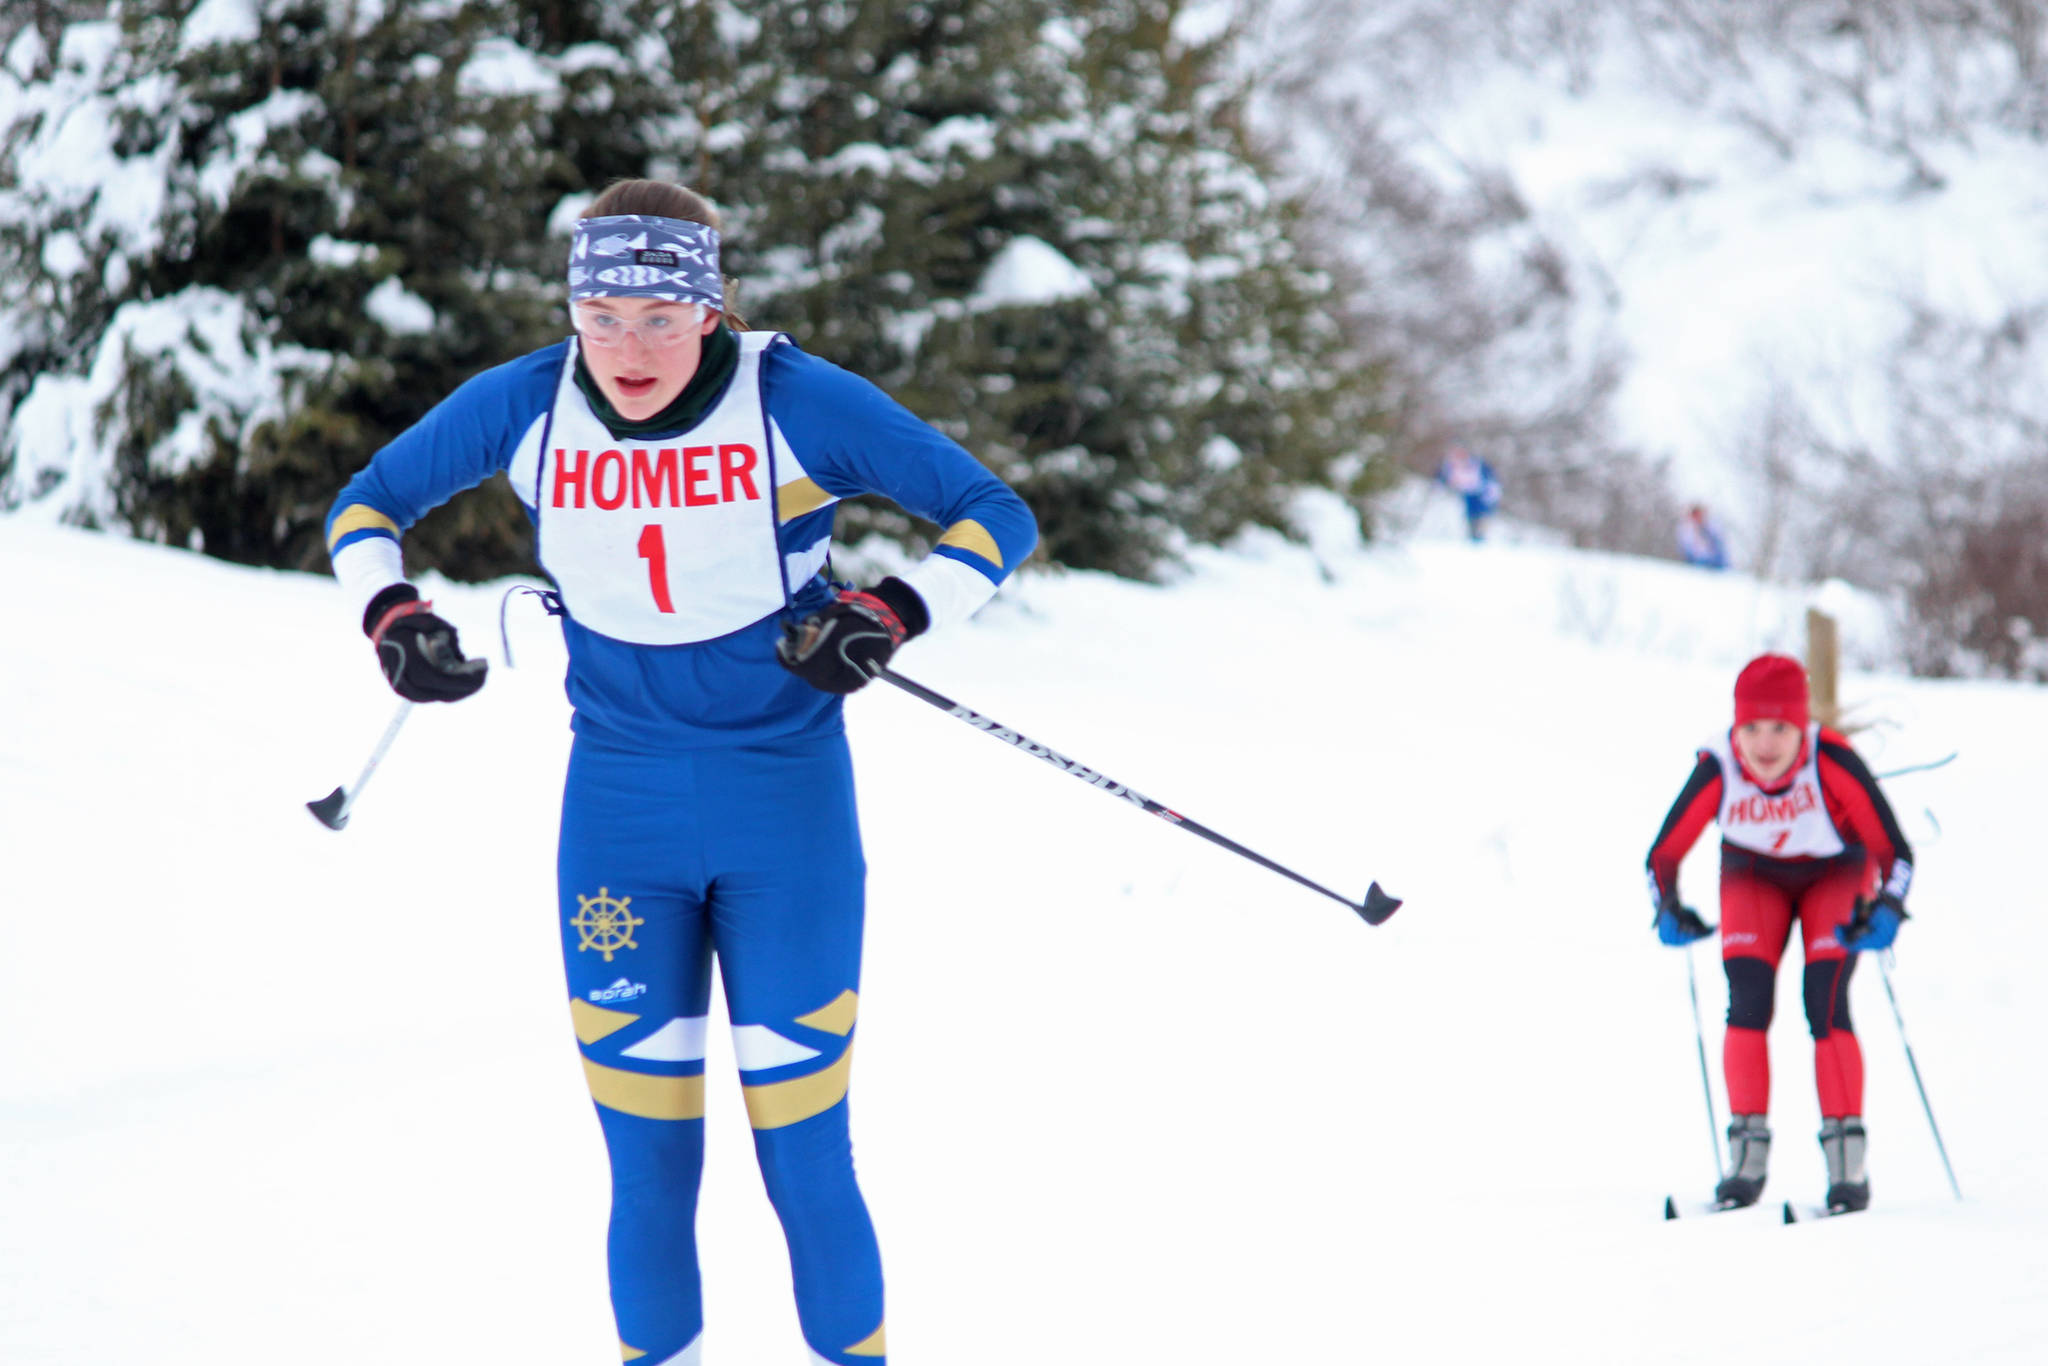 Homer’s Autumn Daigle skis to the finish line of the varsity girls’ classic race just ahead of Kenai’s Maria Salzetti on Friday, Feb. 1, 2019 at the Lookout Mountain Trails near Homer, Alaska. Daigle took first place. (Photo by Megan Pacer/Homer News)